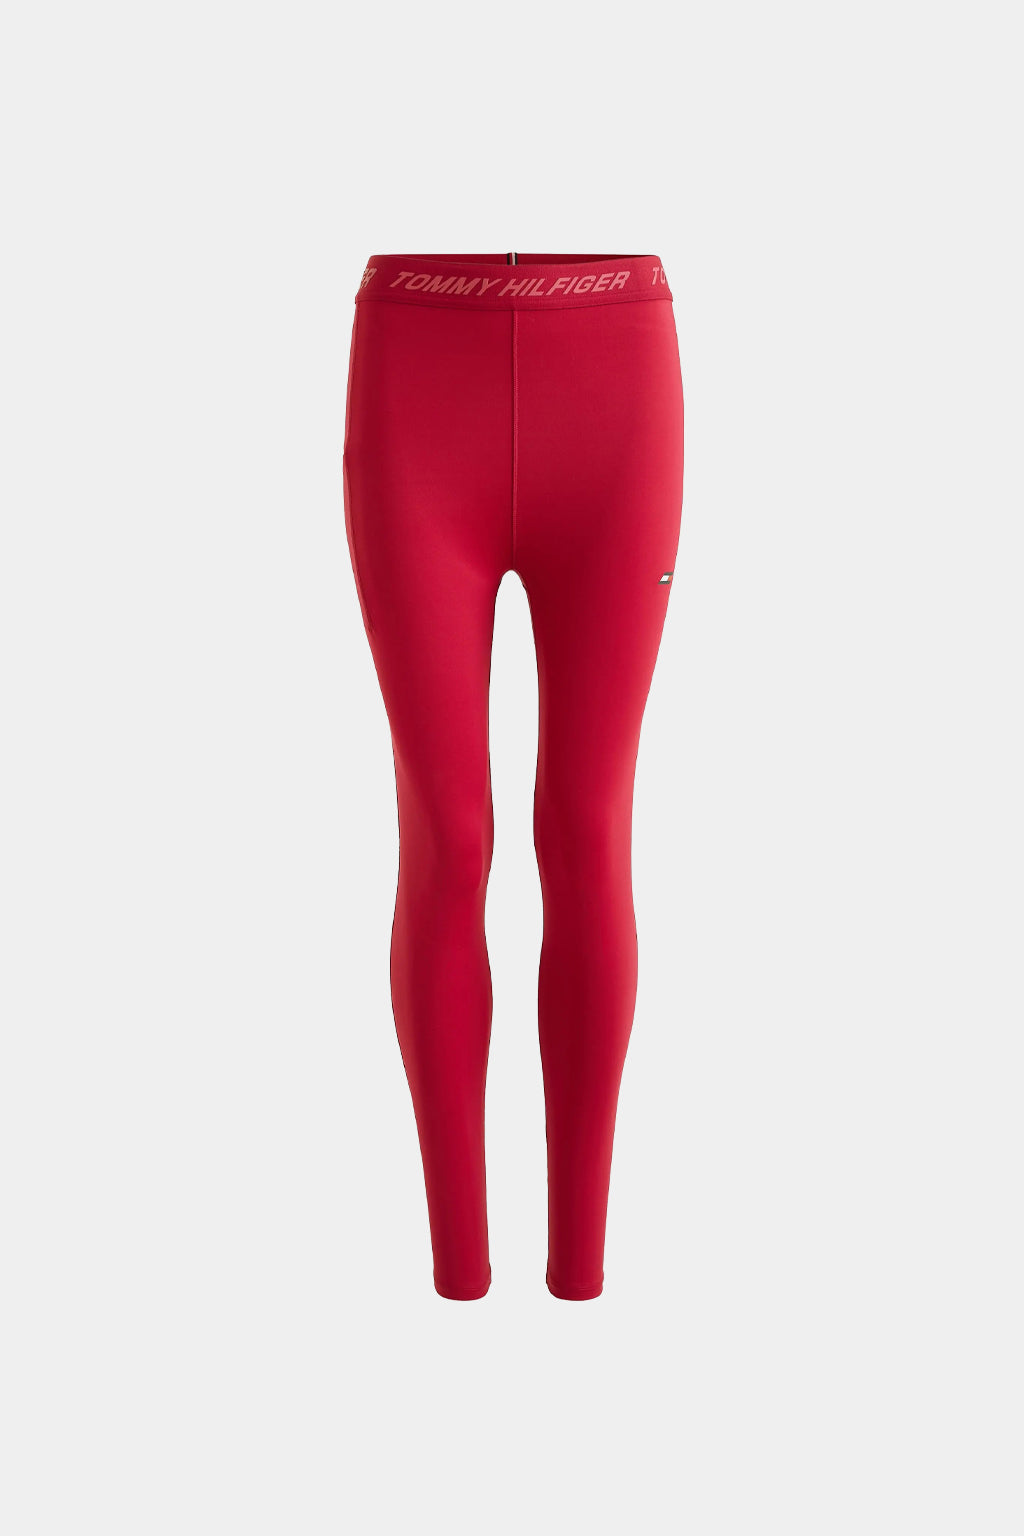 Tommy Hilfiger - Sport Long Leggings With High Rock and Logo